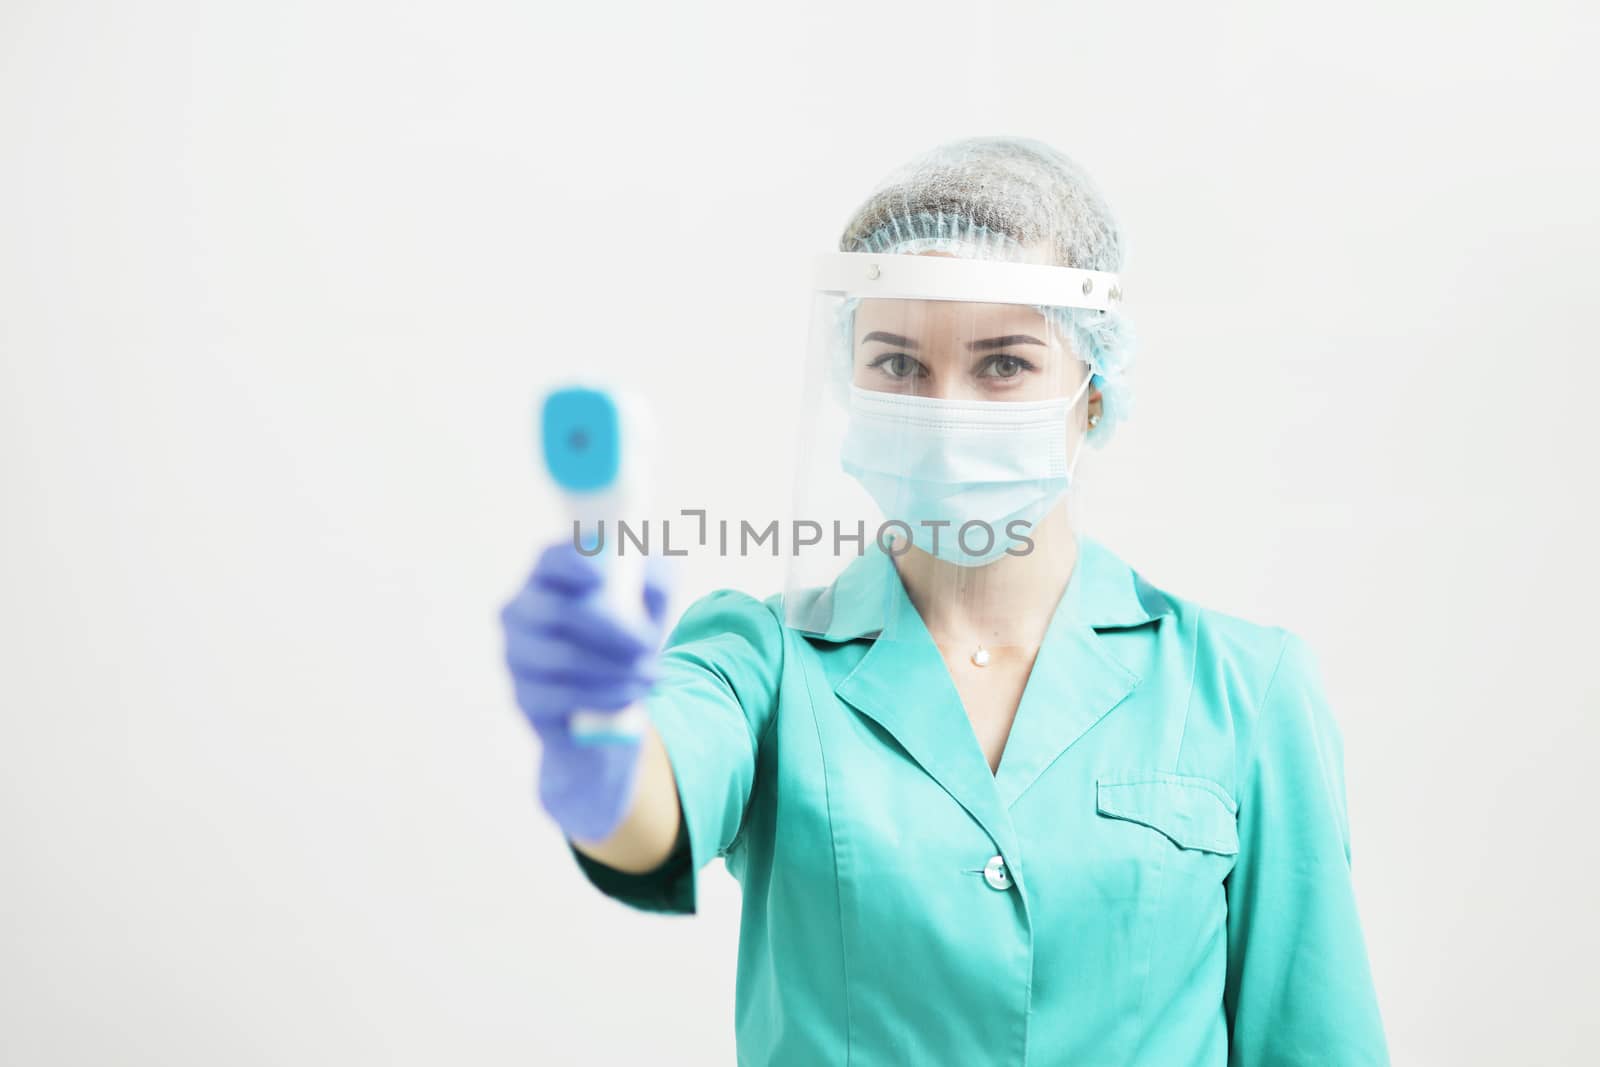 Female doctor or nurse in protective mask at hospital holds pyrometer in hand. Safety measures against the coronavirus. Prevention Covid-19 healthcare concept. Stethoscope over the neck.